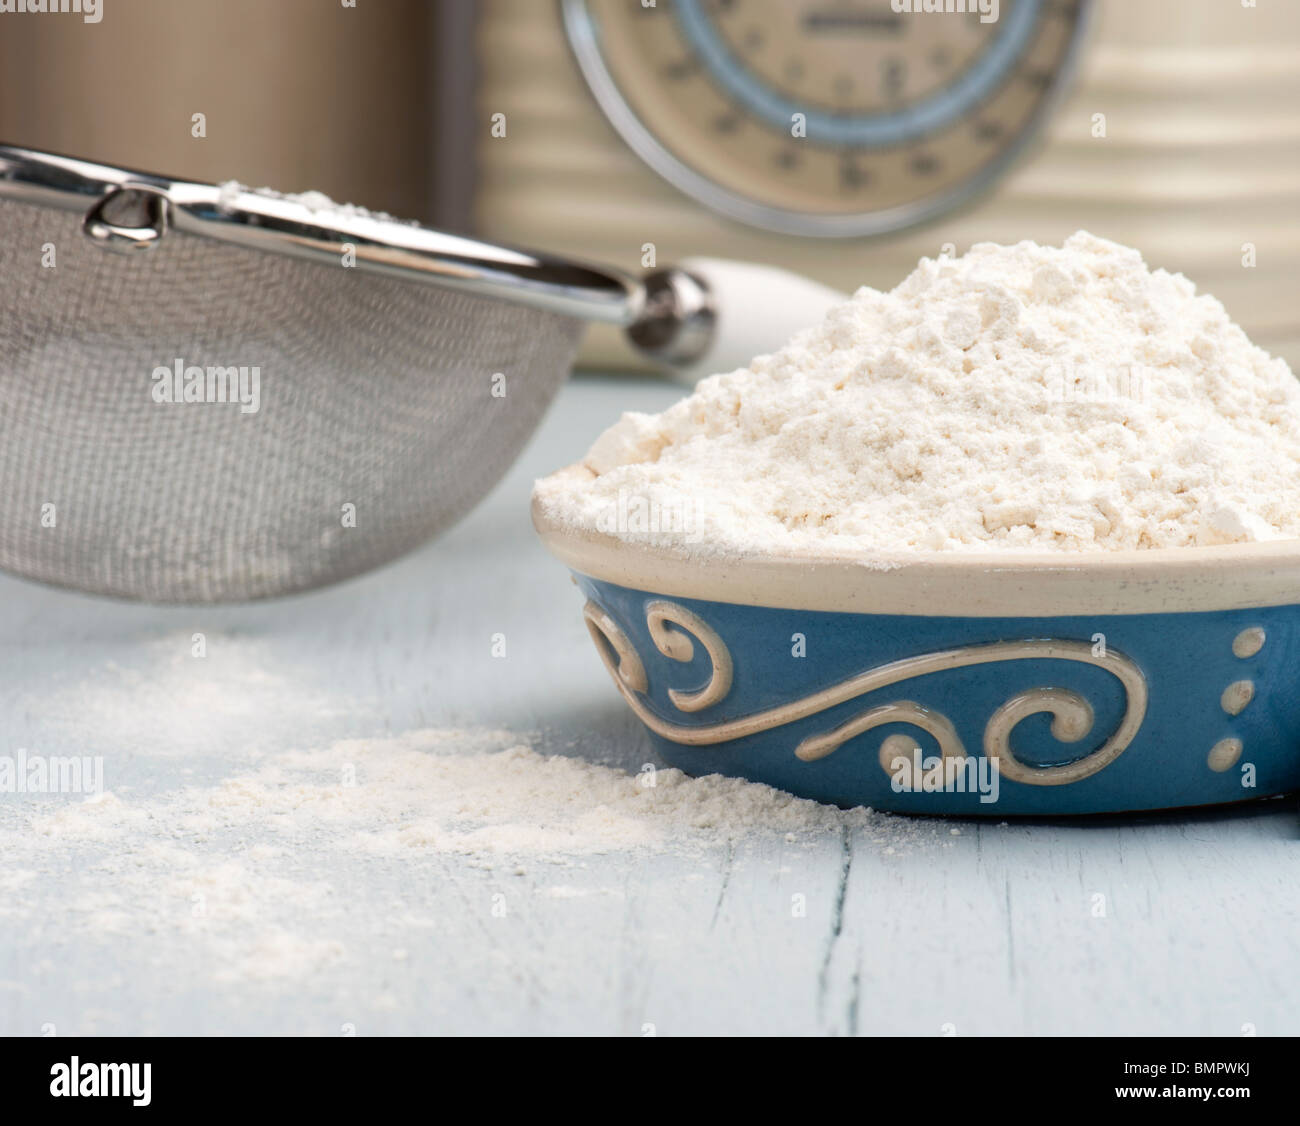 A Dish Full Of Flour With A Sieve and Scales In The Background Stock Photo